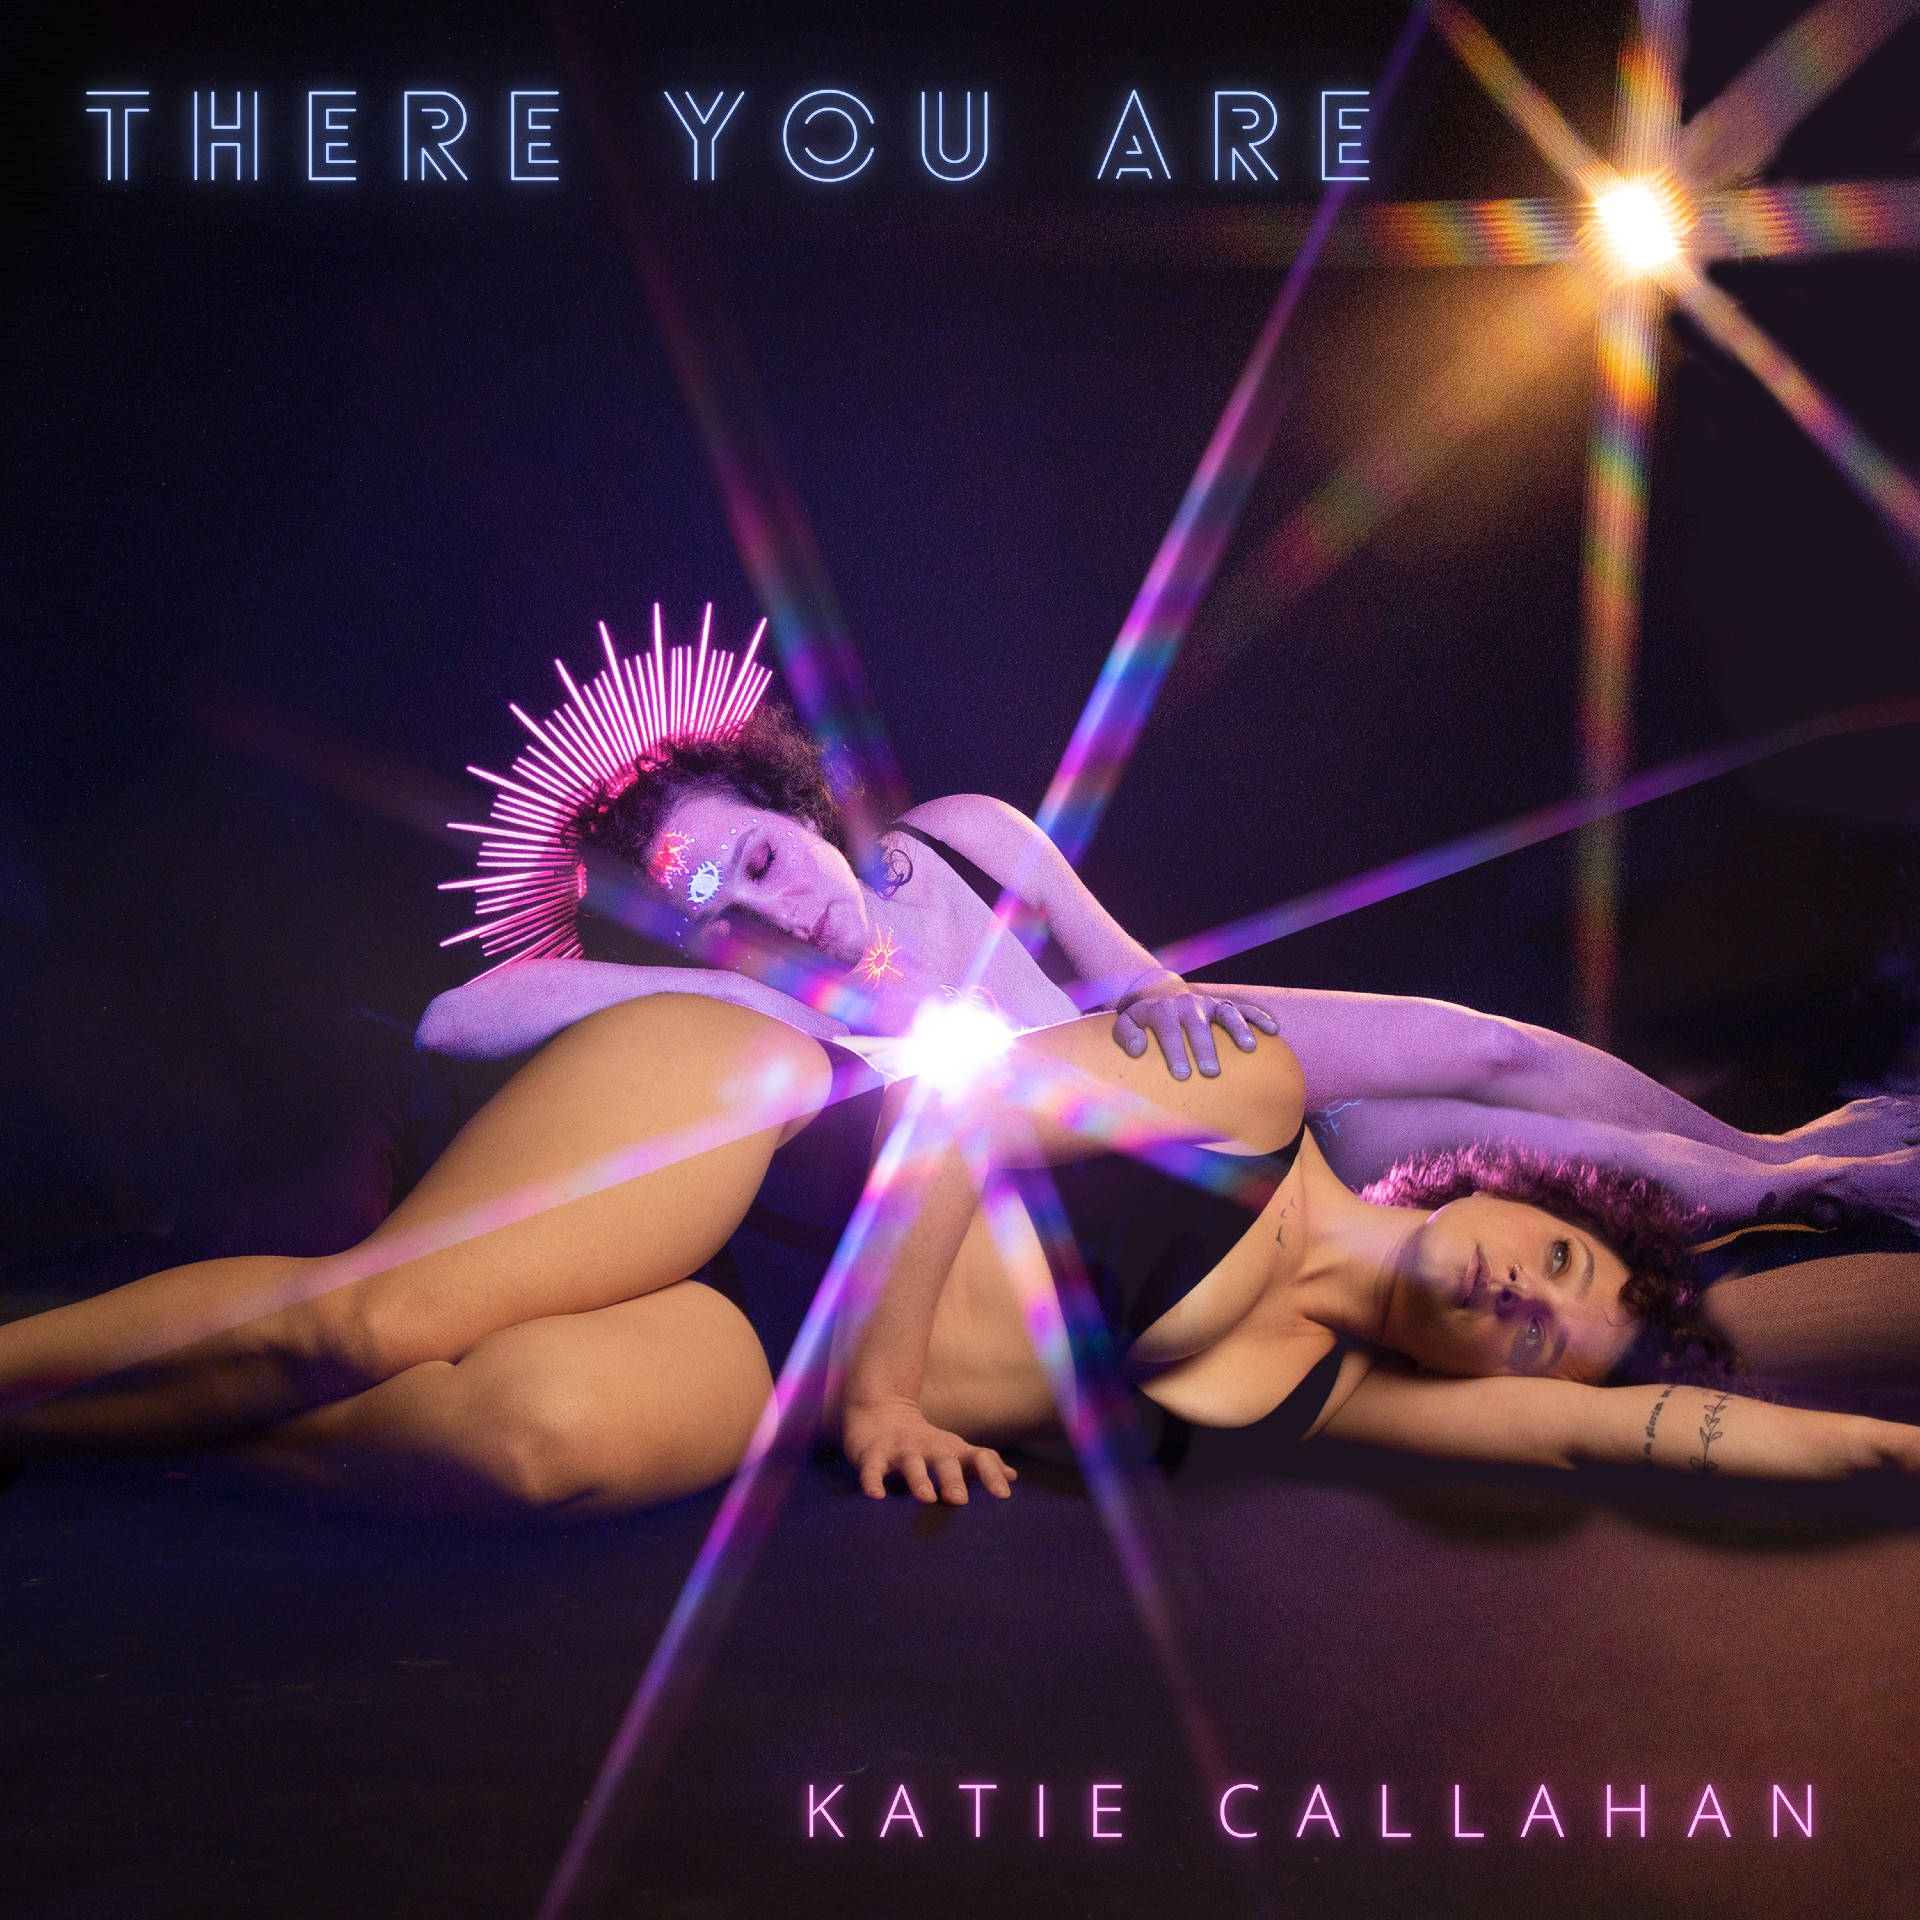 Katie Callahan “There You Are” single artwork